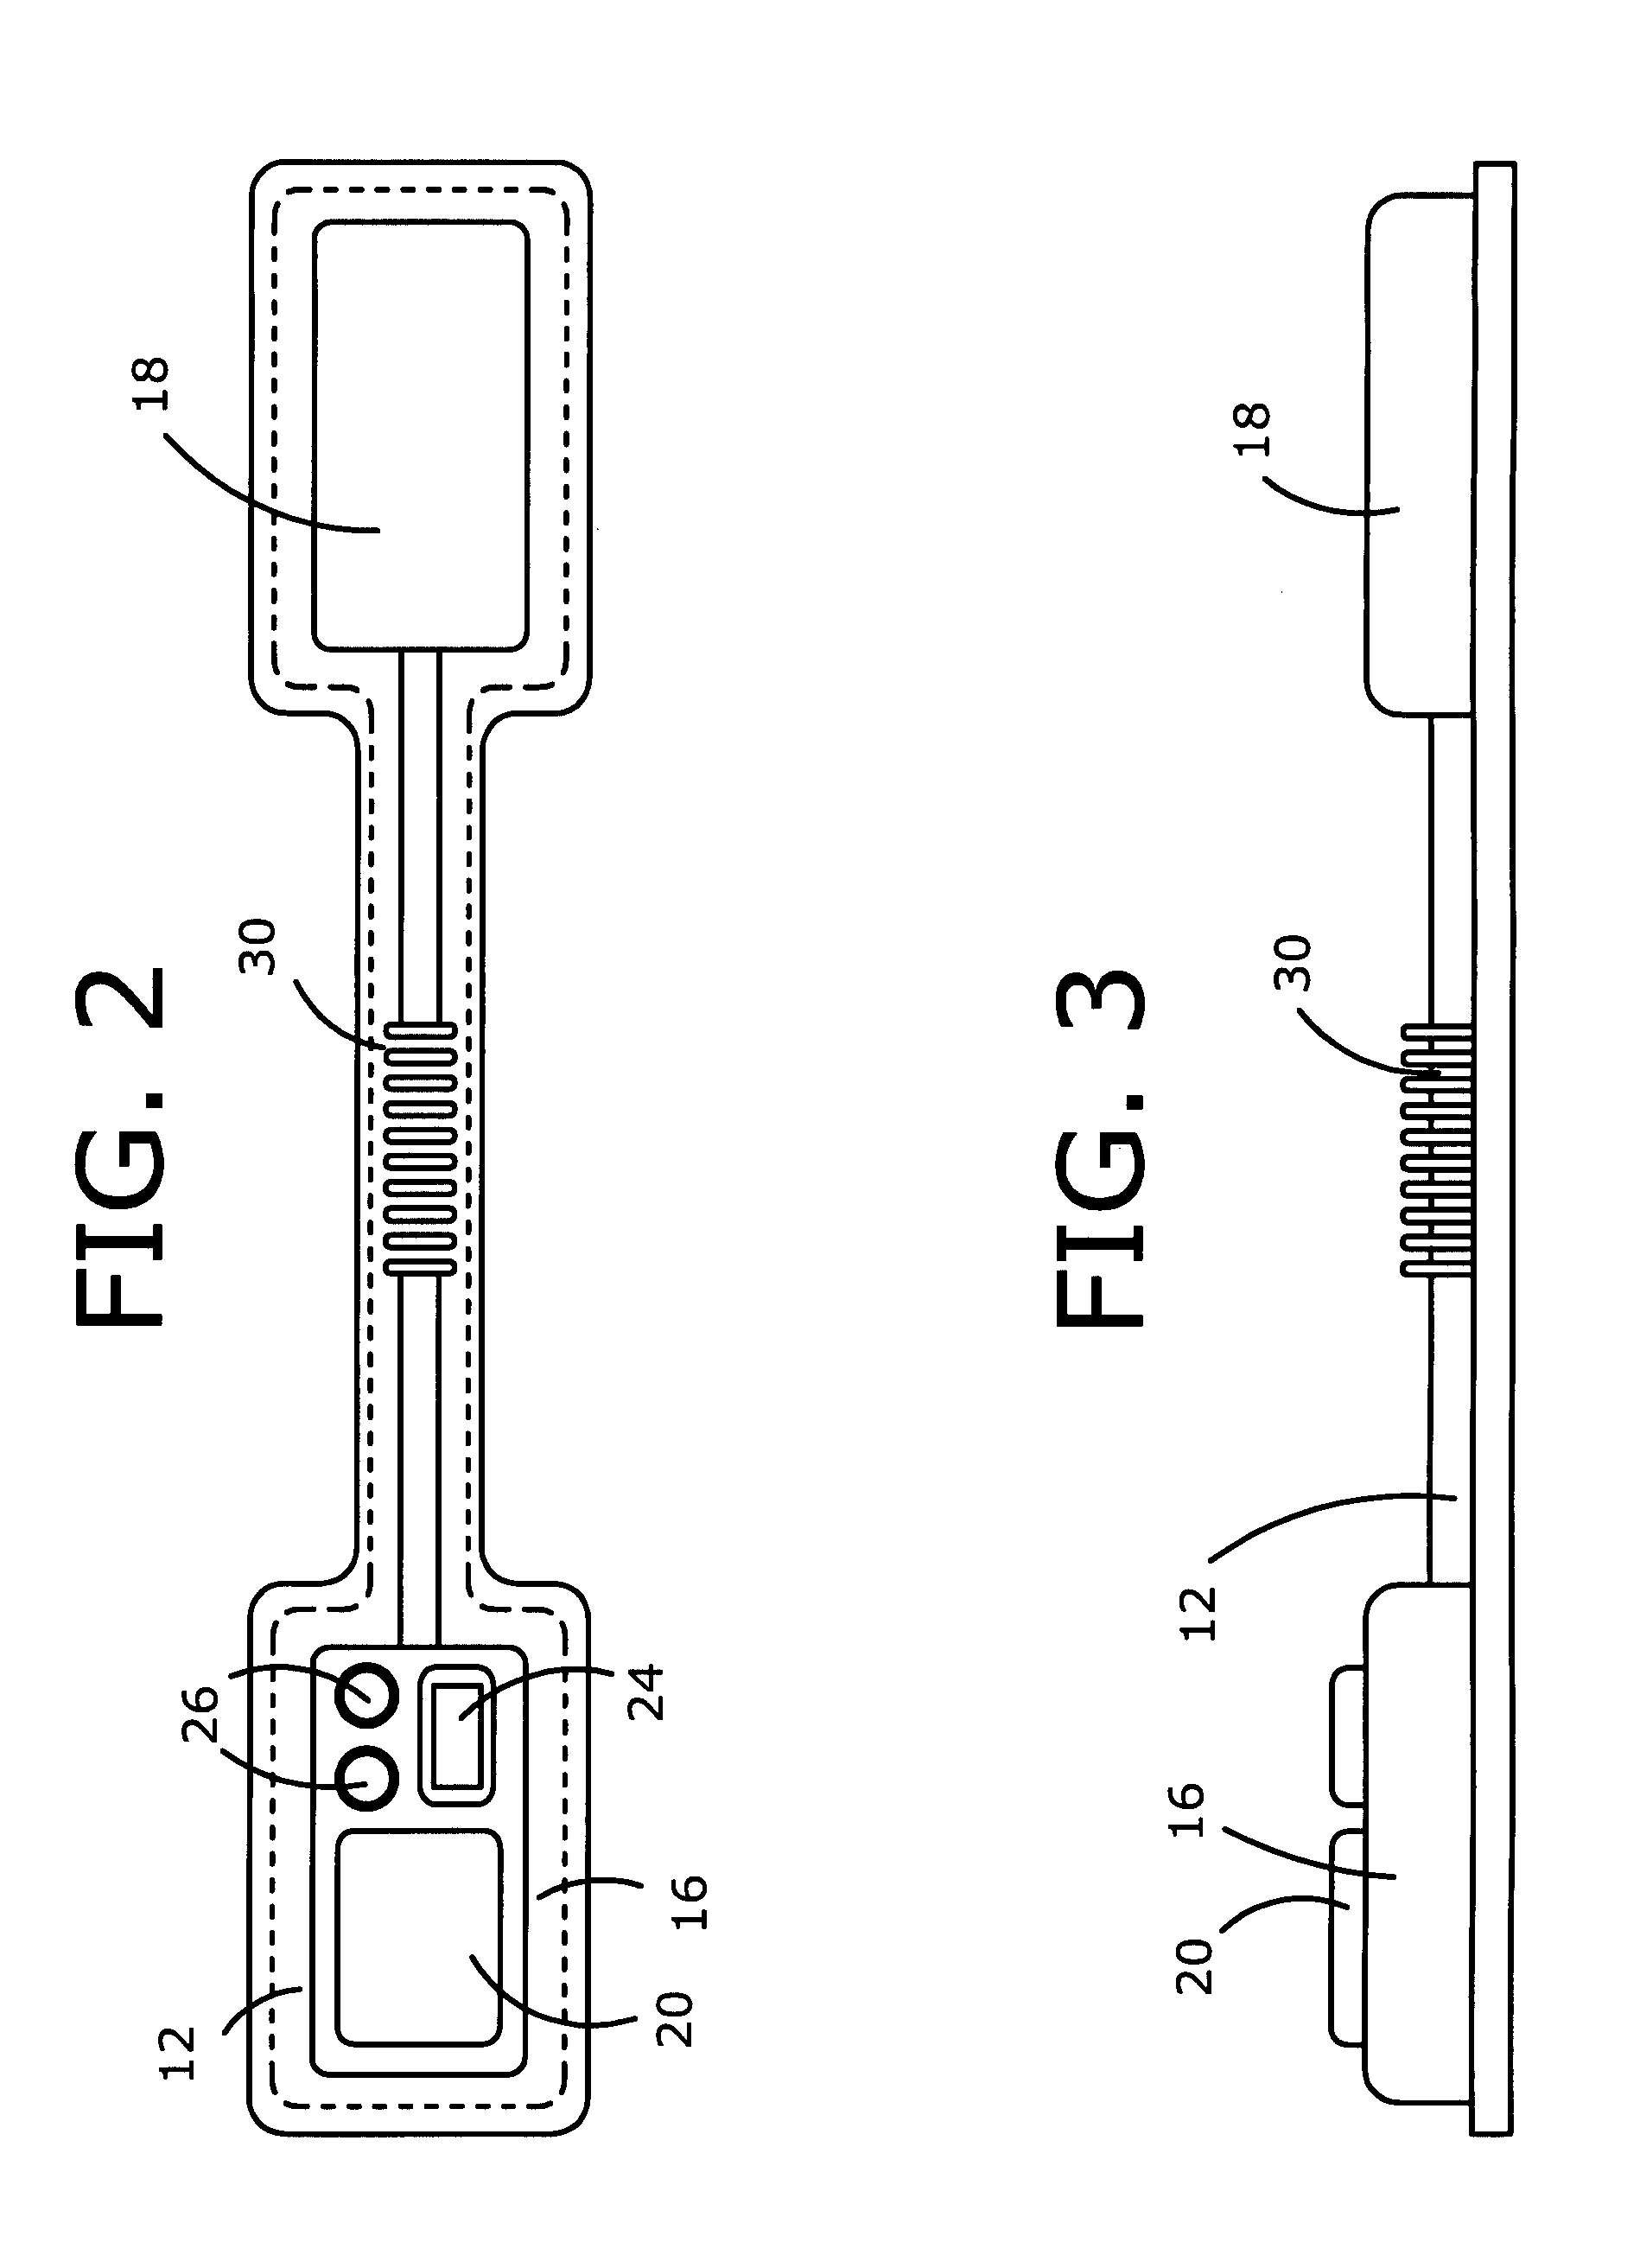 Covert alarm and locator apparatus for miners